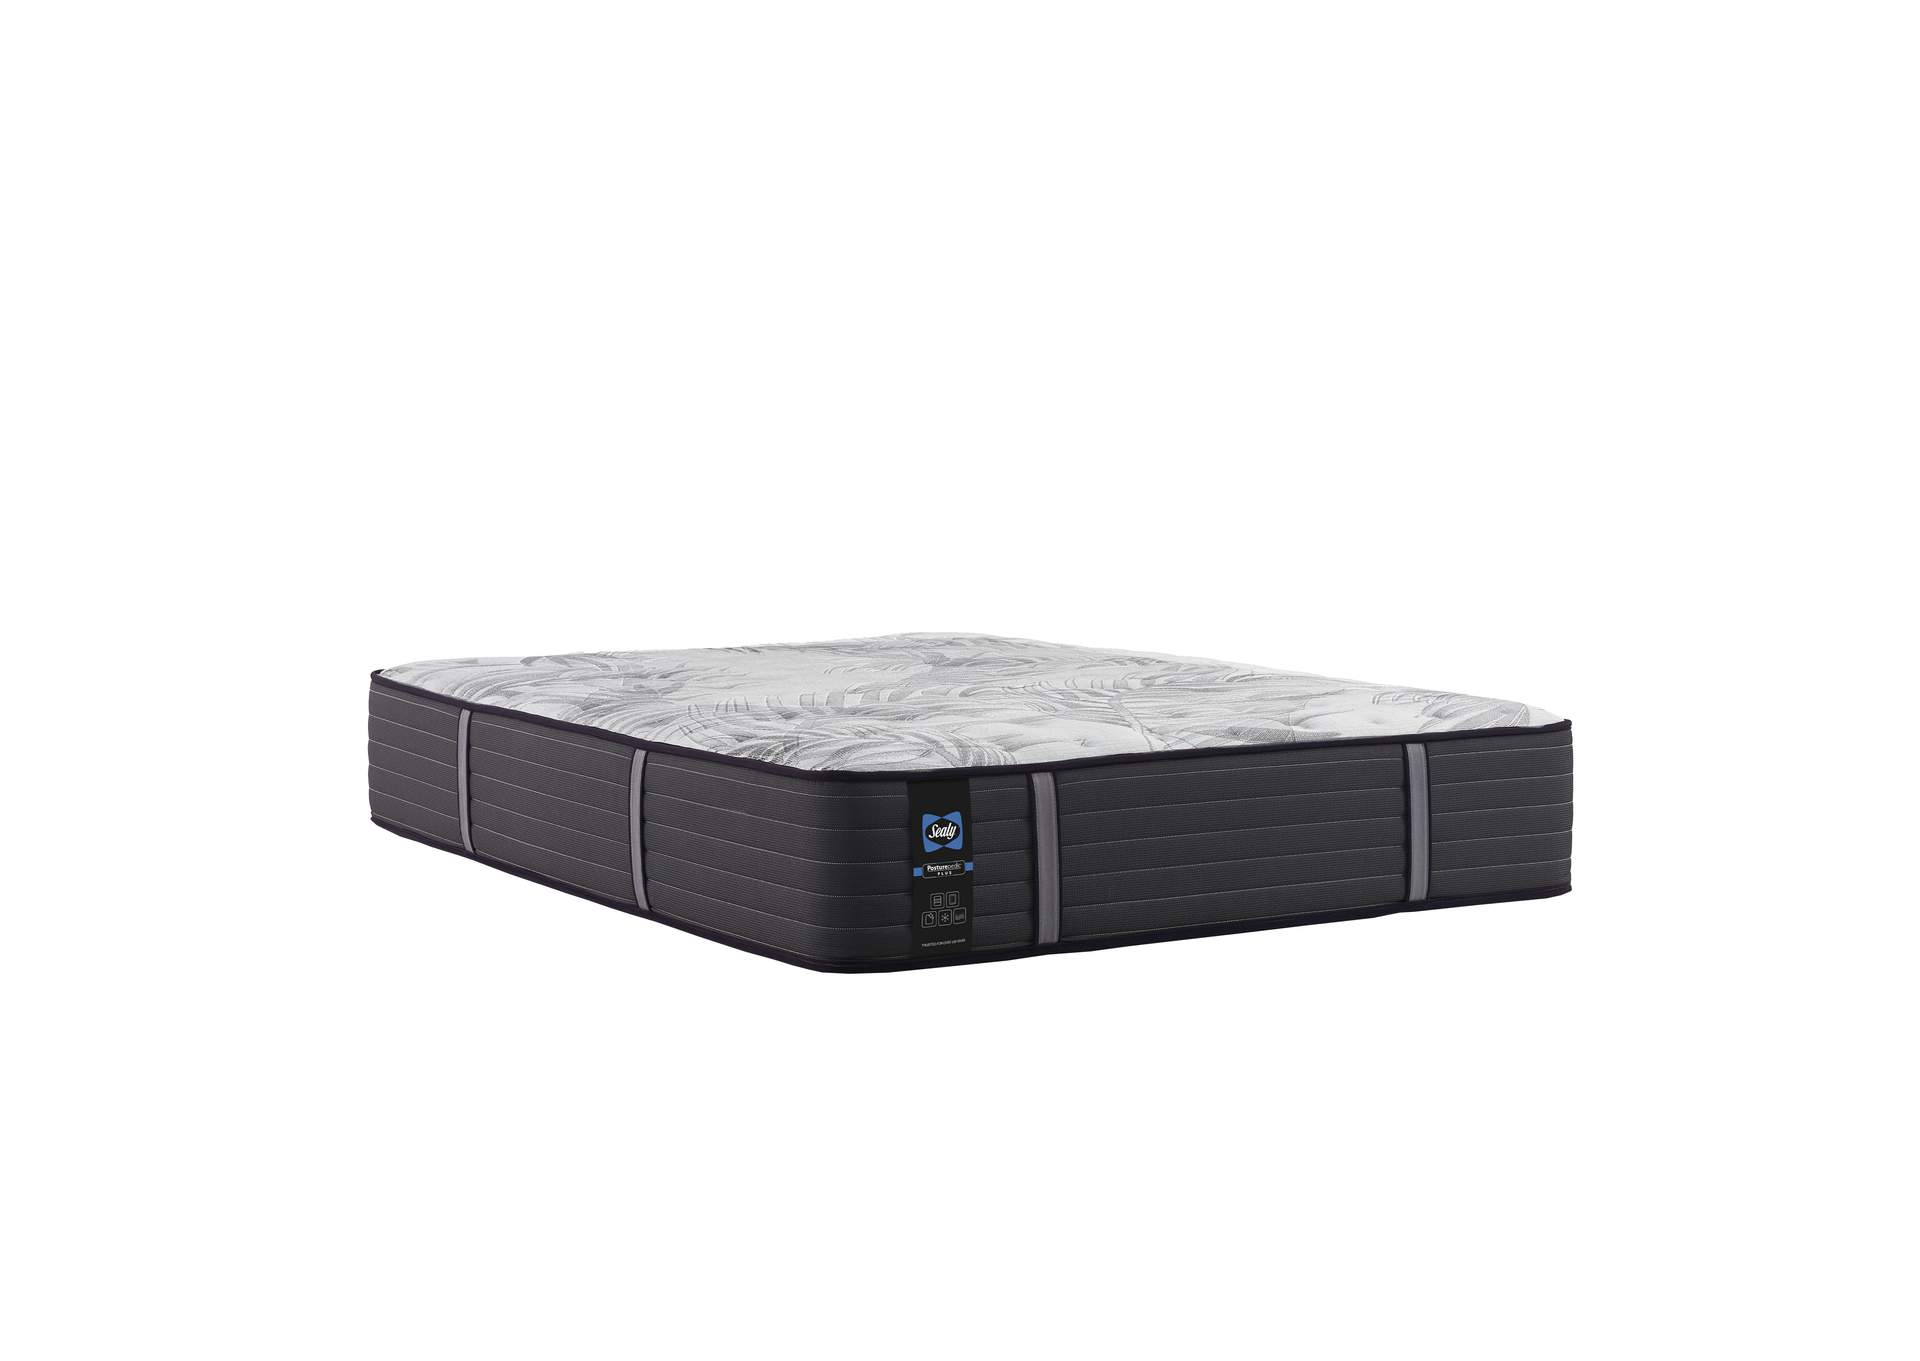 Victorious Soft Tight Top Queen Mattress,Sealy